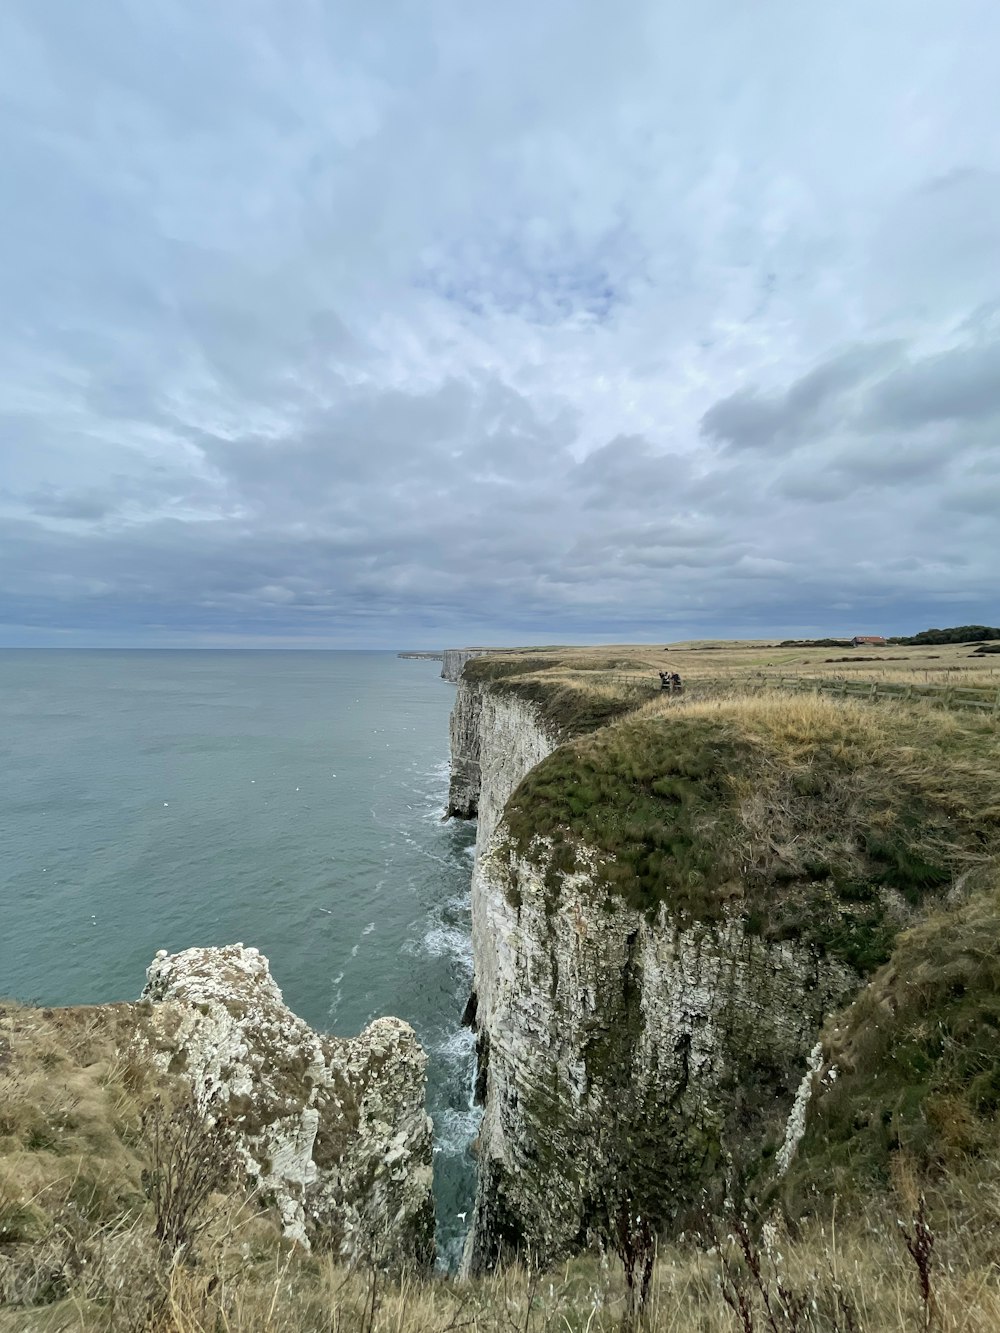 a cliff side with a body of water below